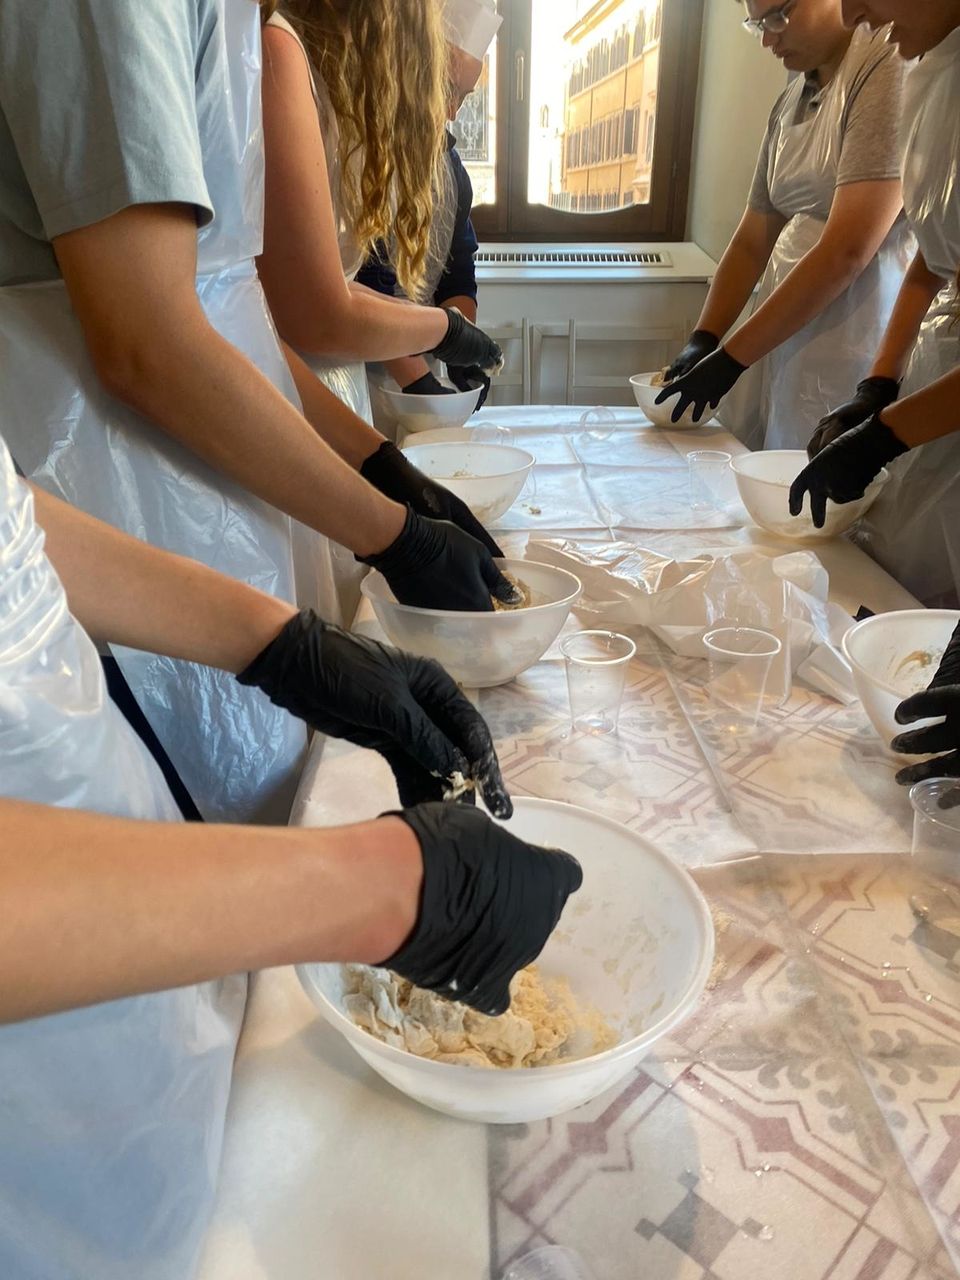 Students Kneading Pizza Dough